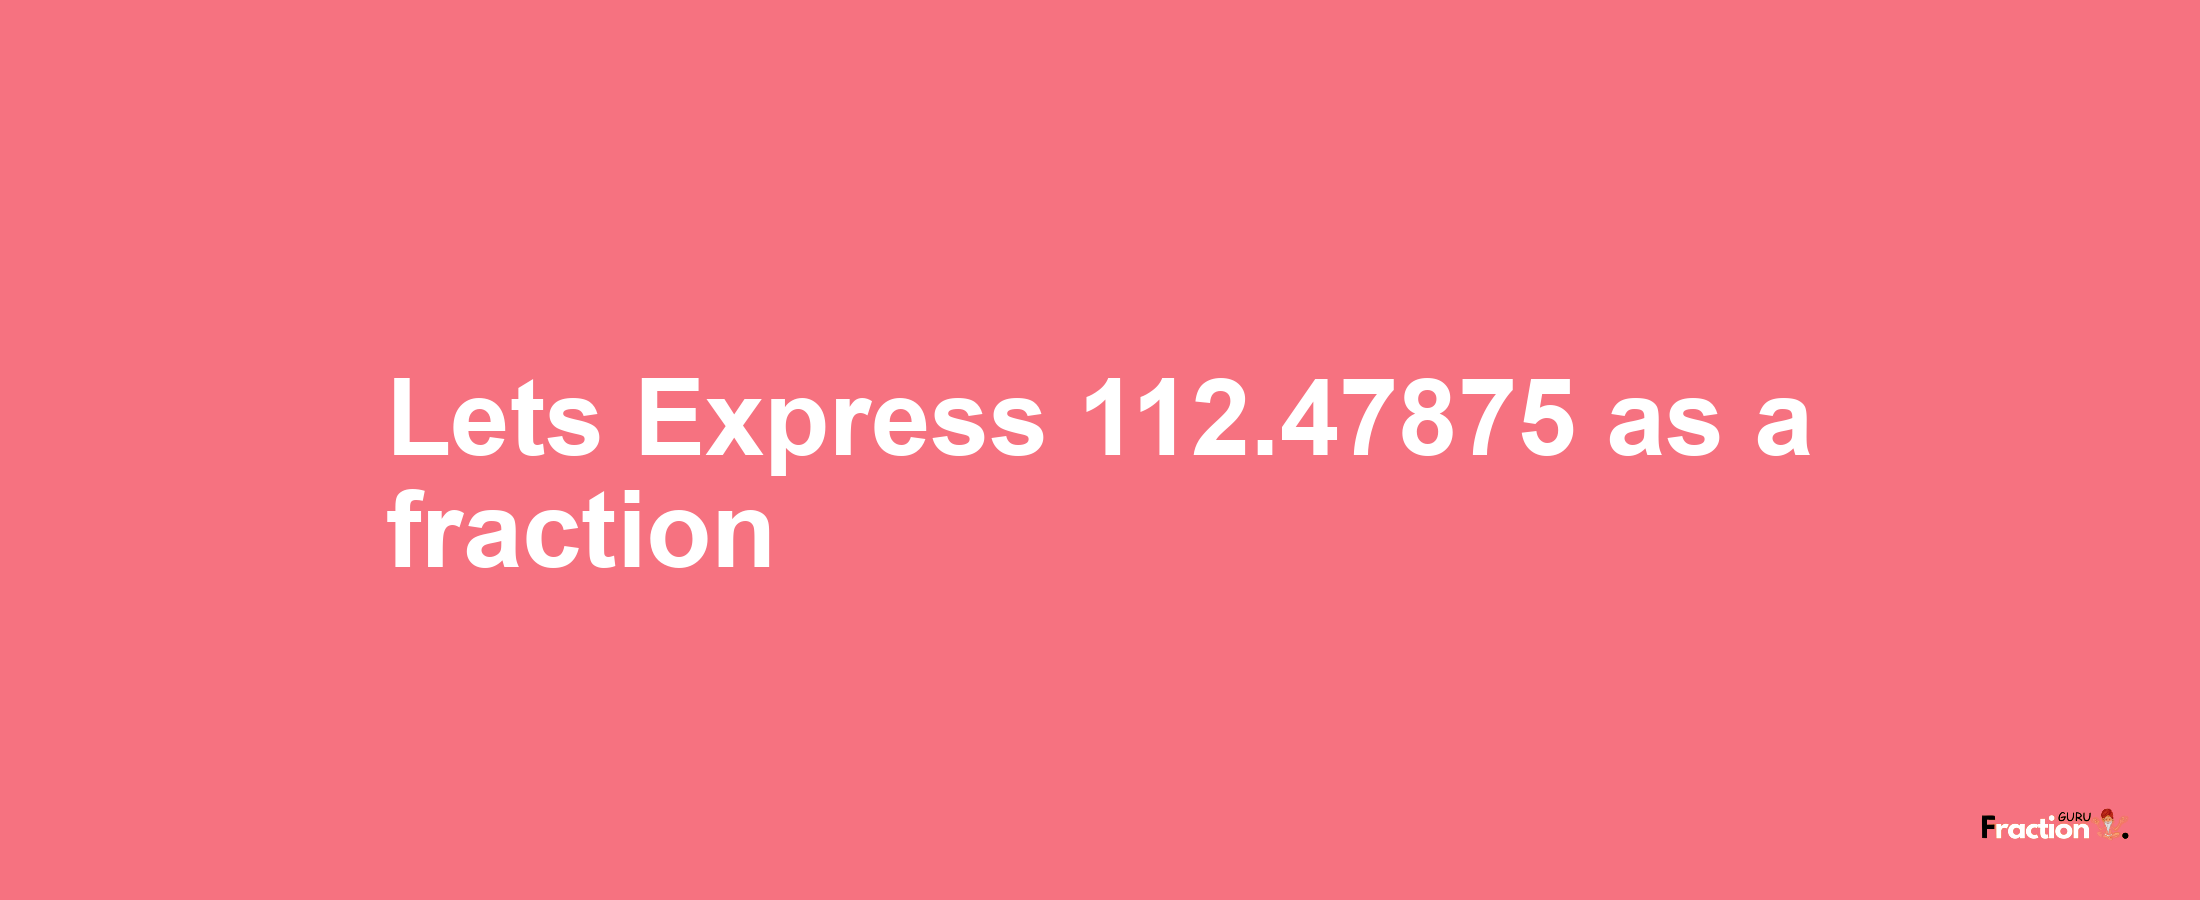 Lets Express 112.47875 as afraction